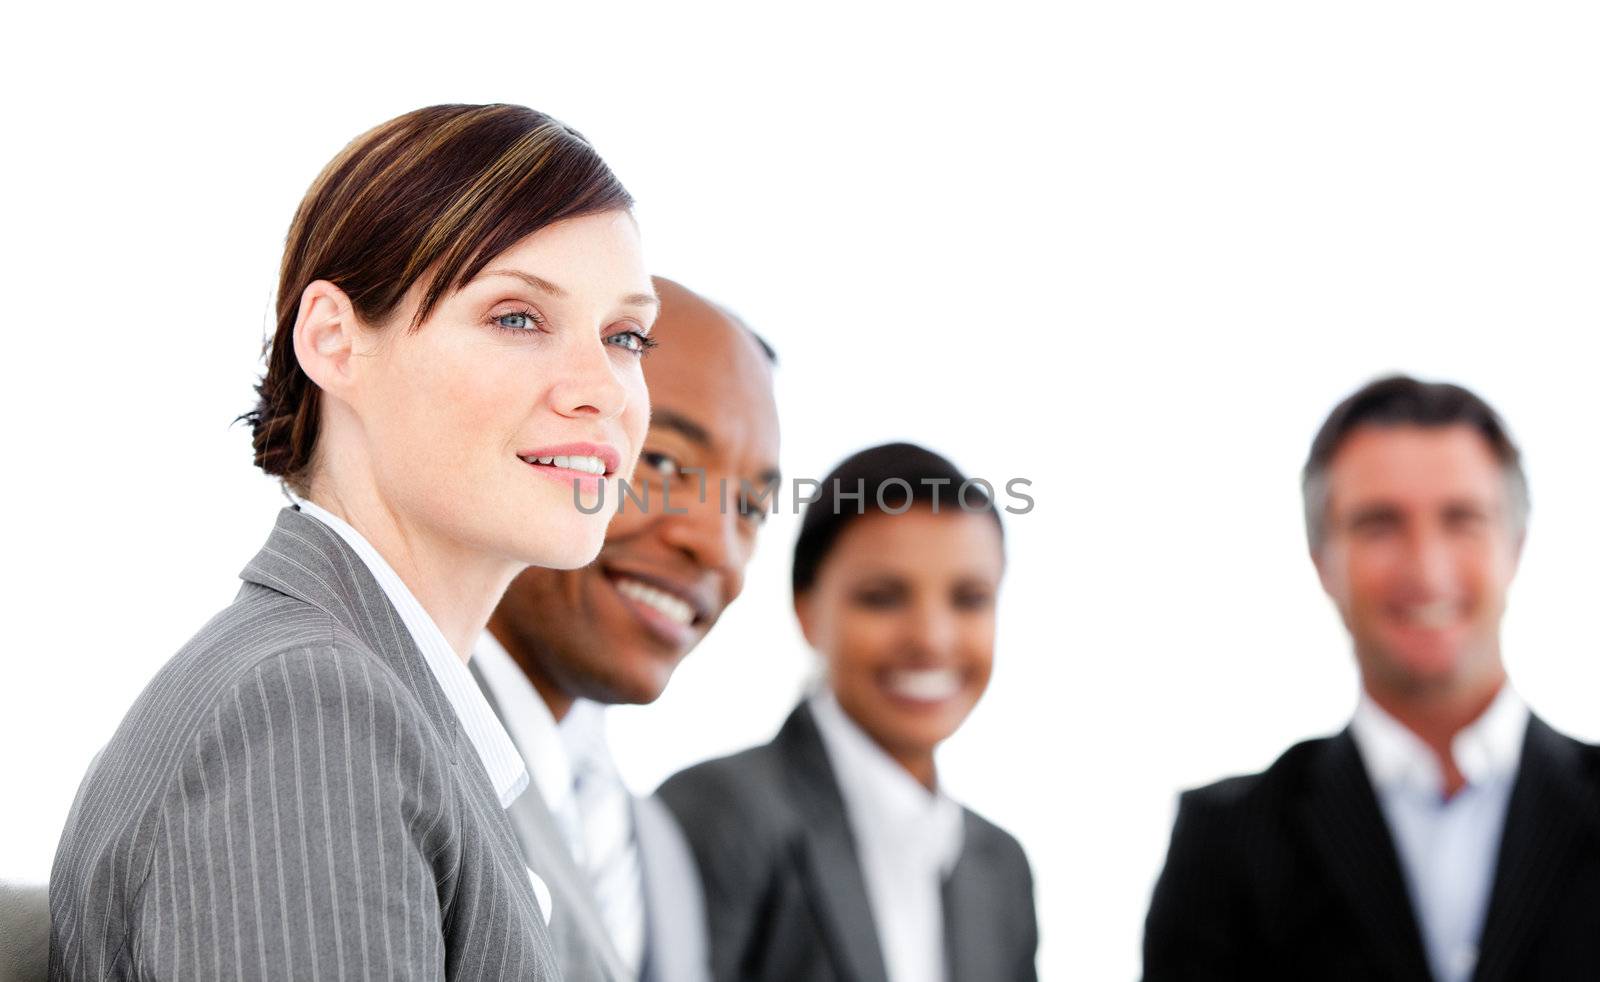 Portrait of smiling businesspeople listenning a presentation against a white background